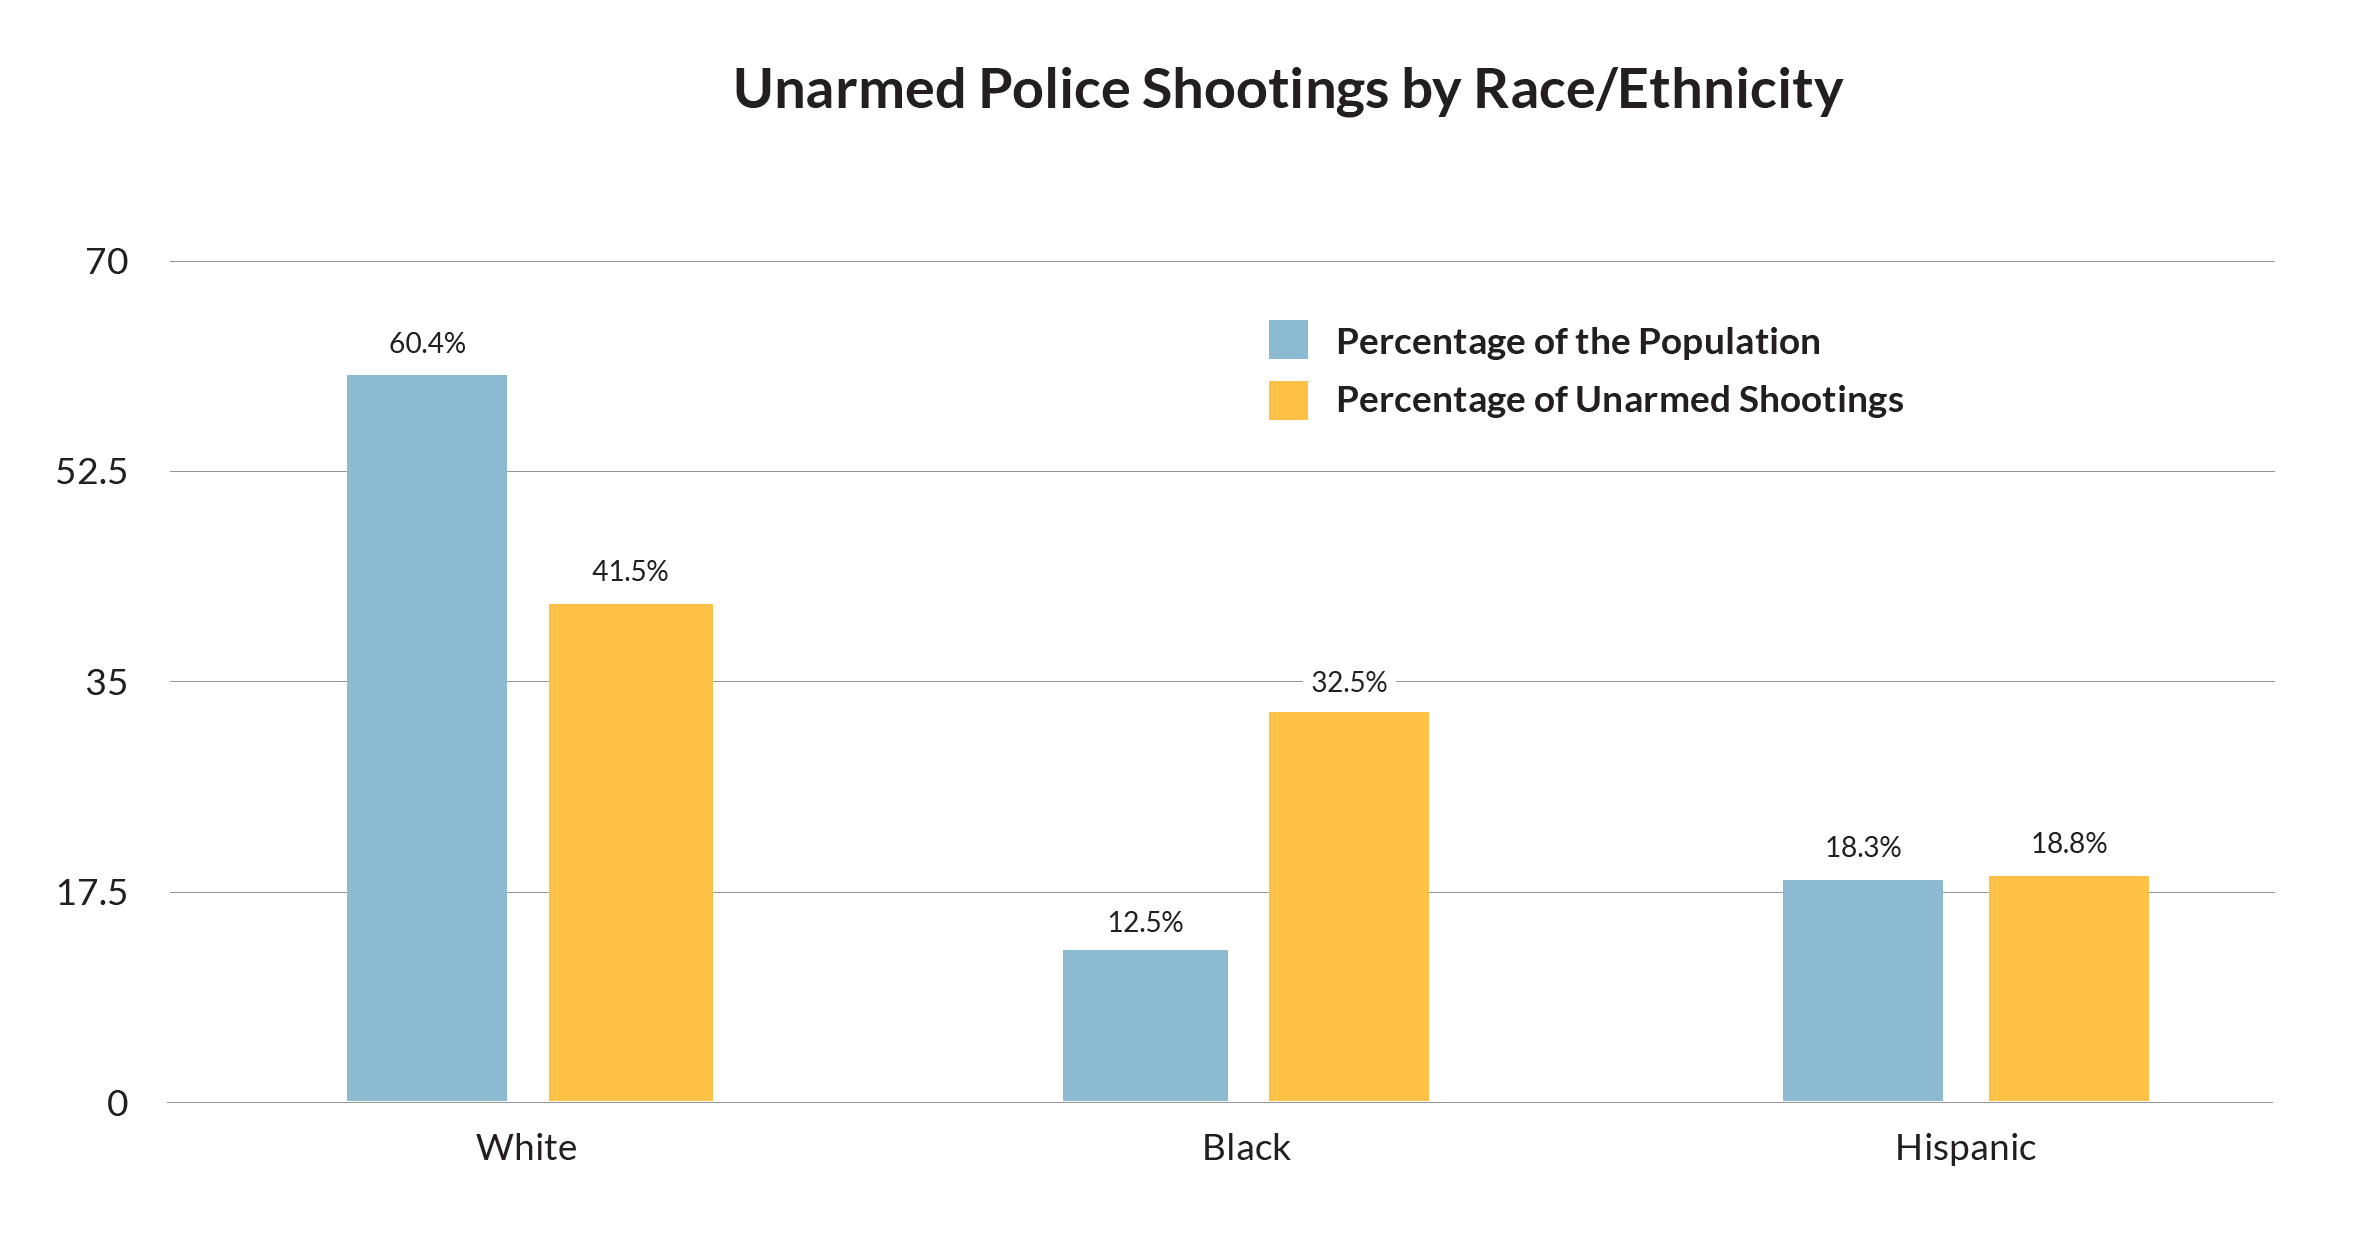 Unarmed Police Shootings by Race/Ethnicity